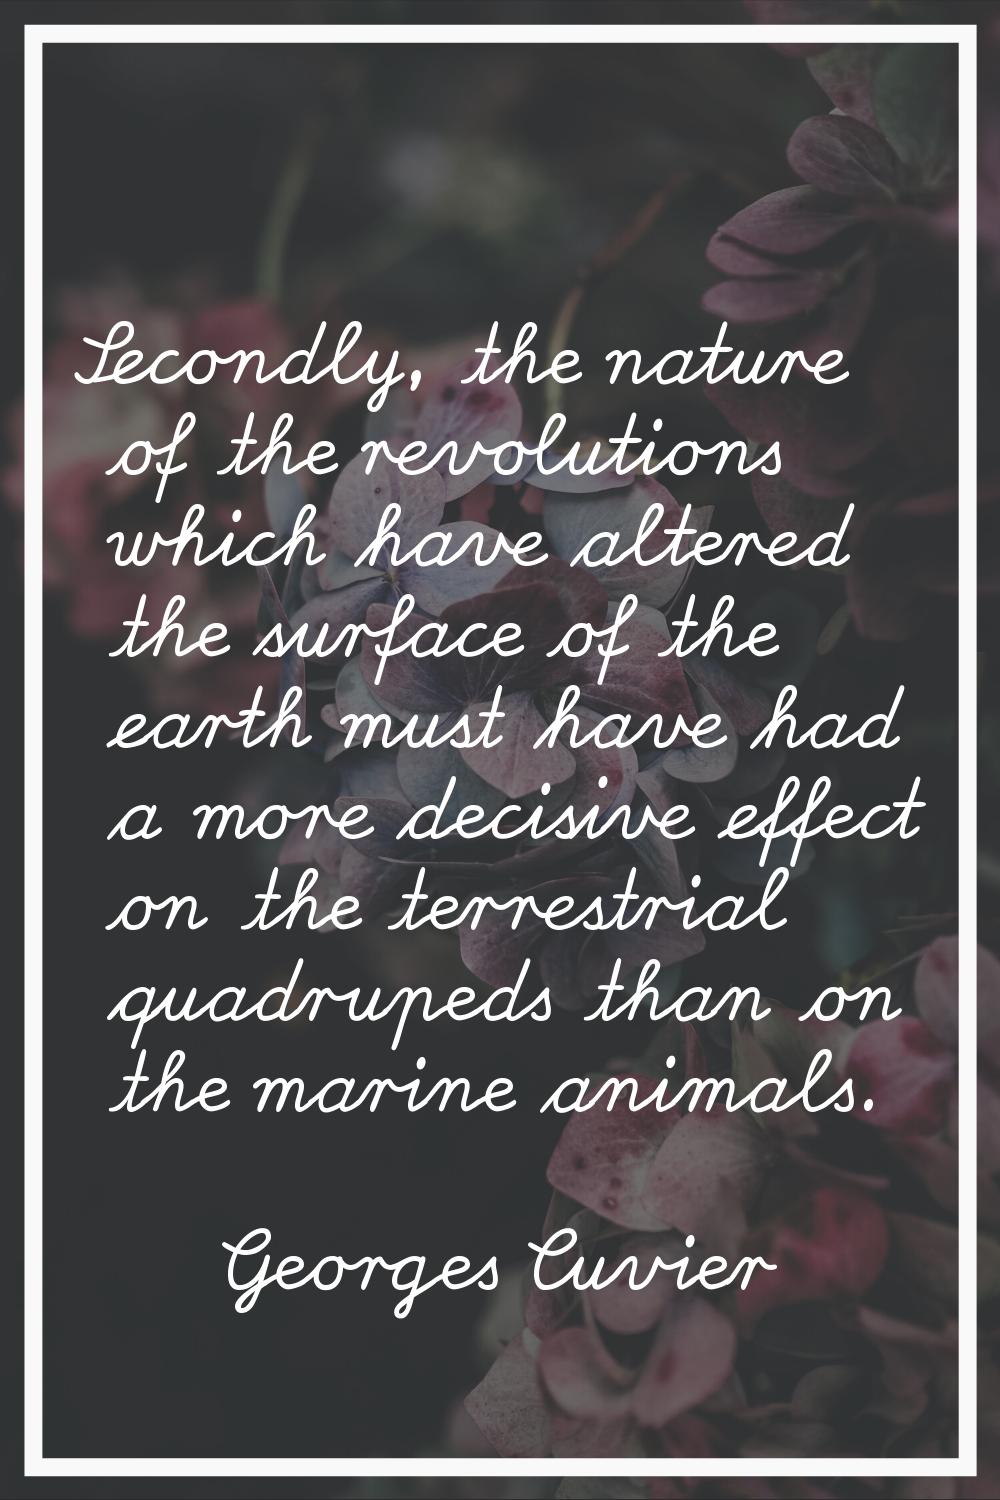 Secondly, the nature of the revolutions which have altered the surface of the earth must have had a